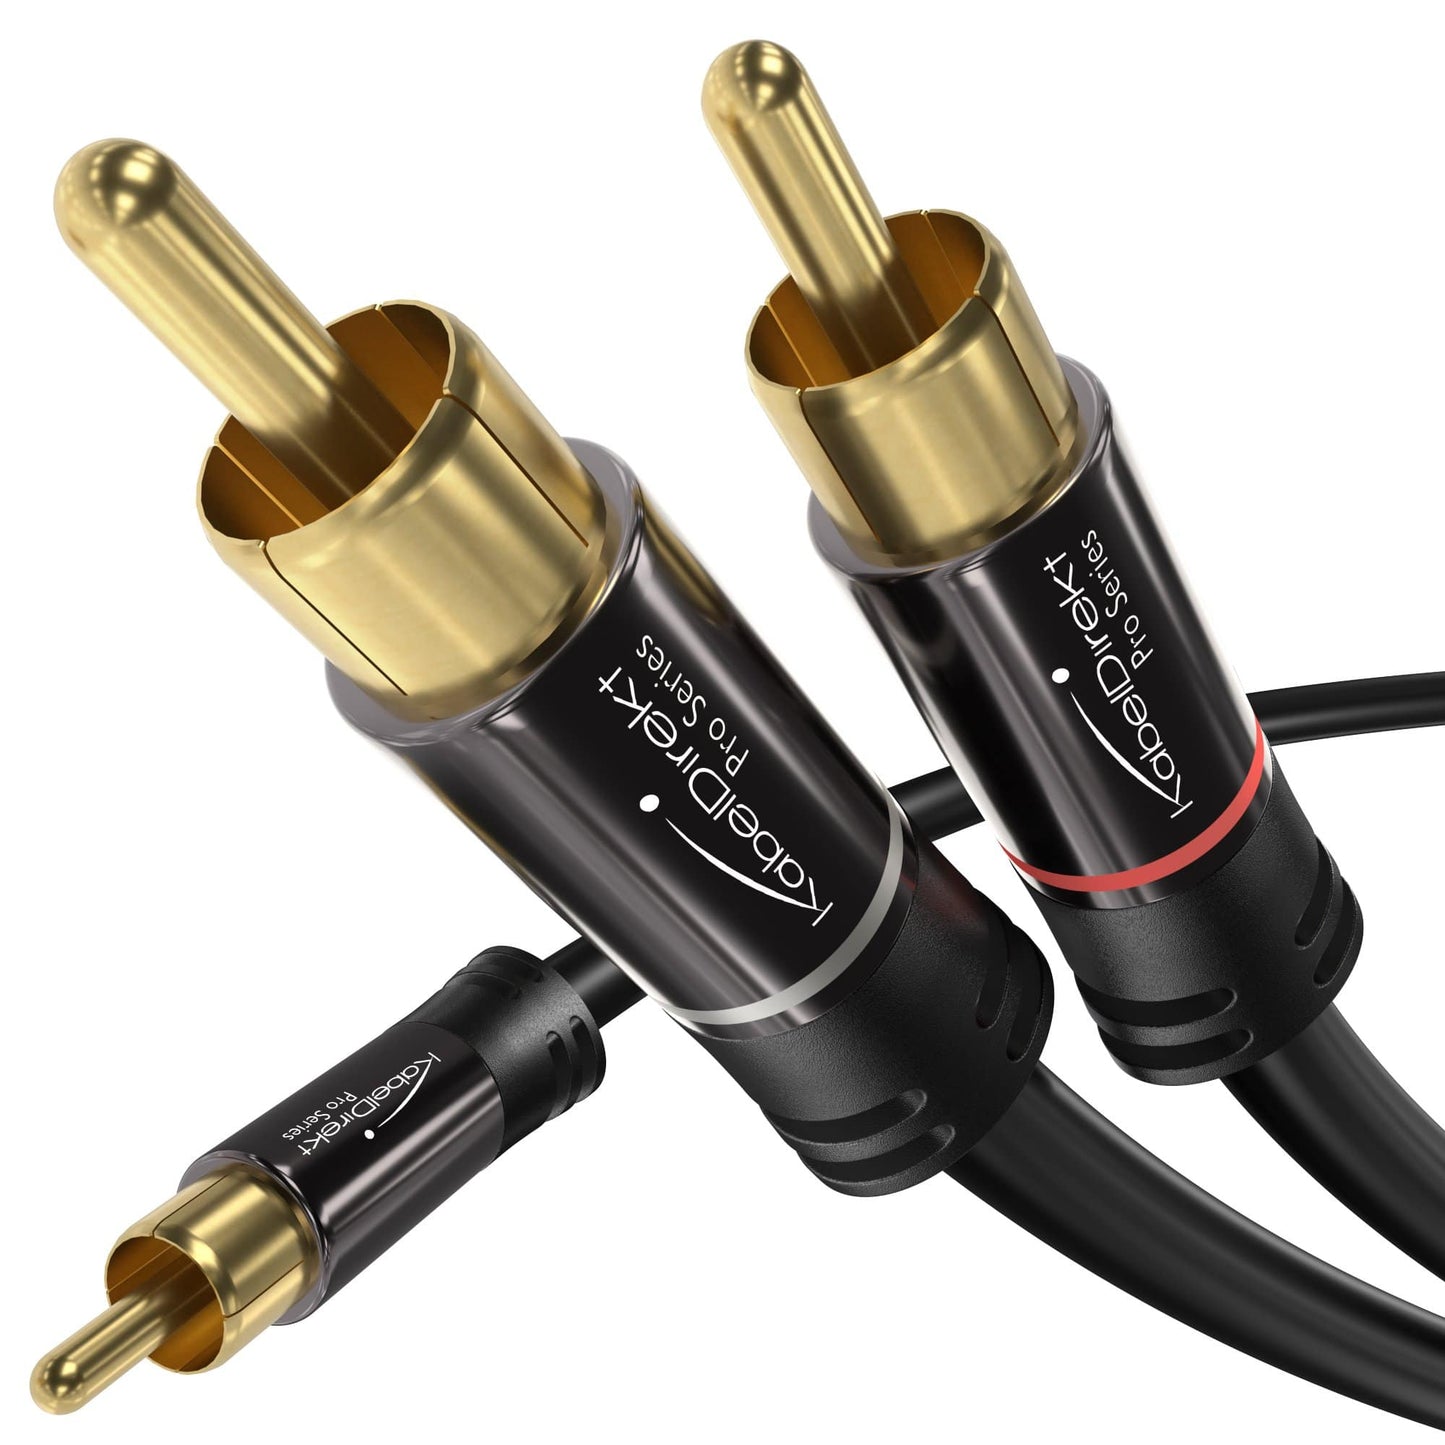 RCA Jack to 2xRCA Plug Adapter - Y-Adapter